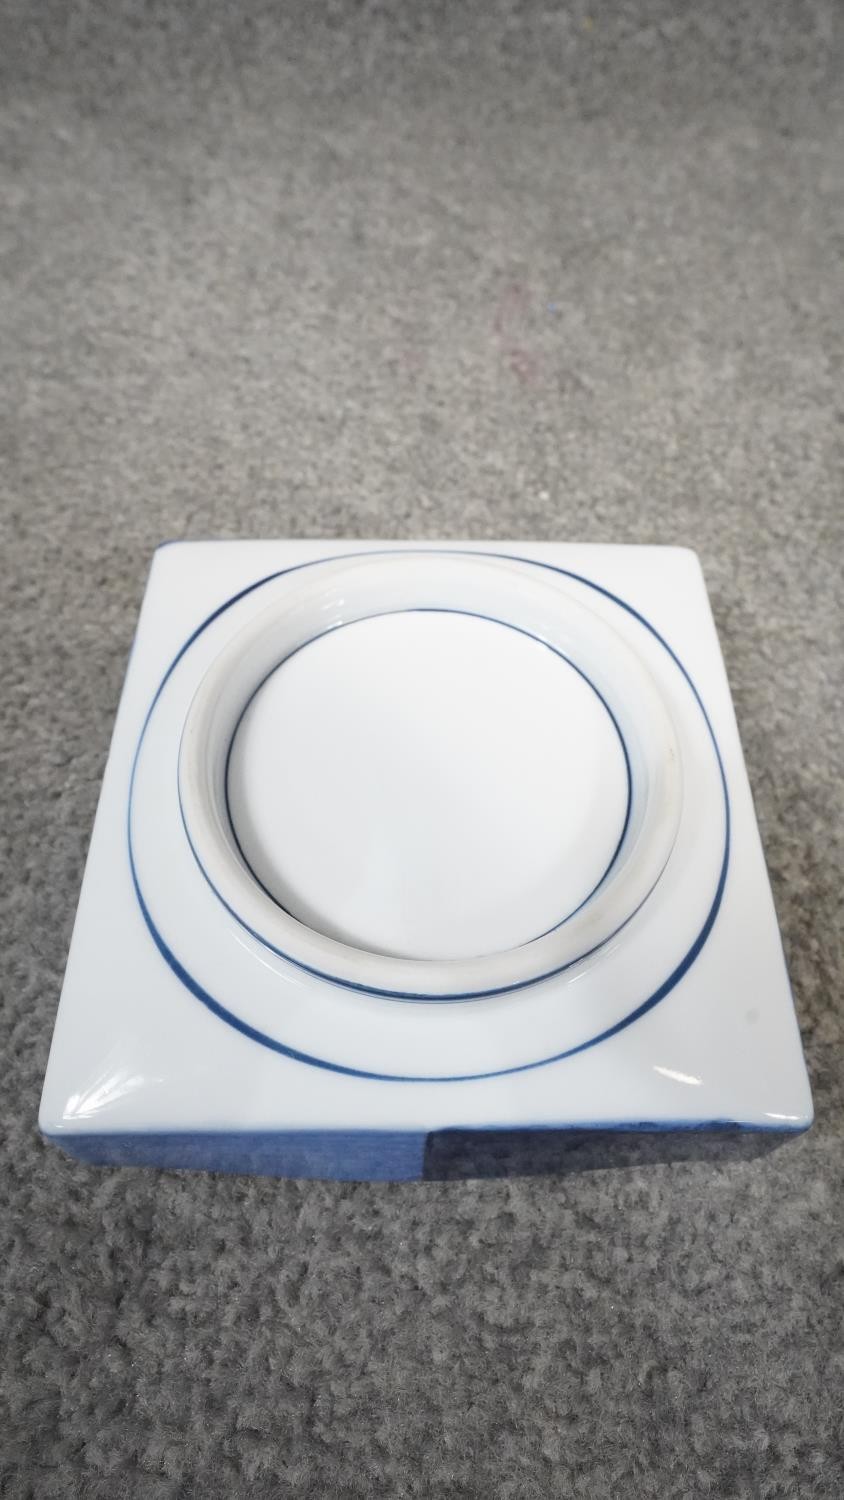 A Shiseido design Angela Cummings dinner plate along with three glazed ceramic dishes with quartered - Image 5 of 8